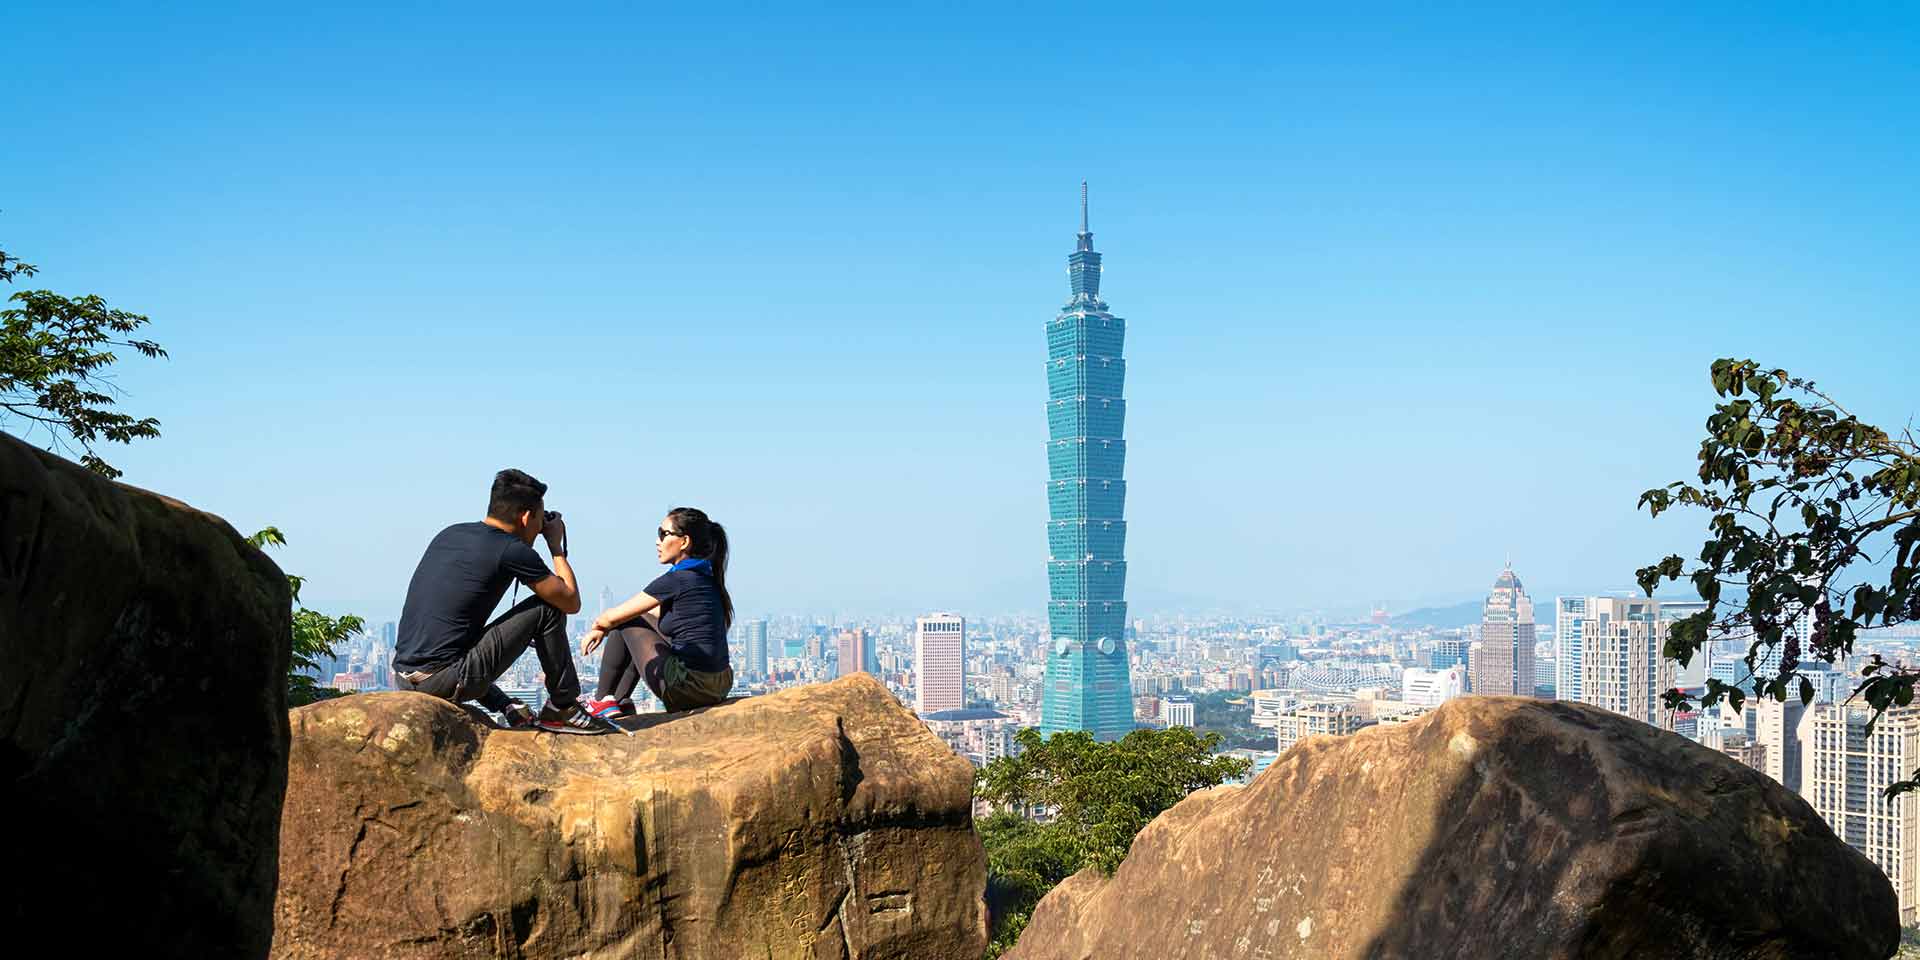 Artisans and Crafts: An Insider’s Guide to Taipei’s New and Old Allure